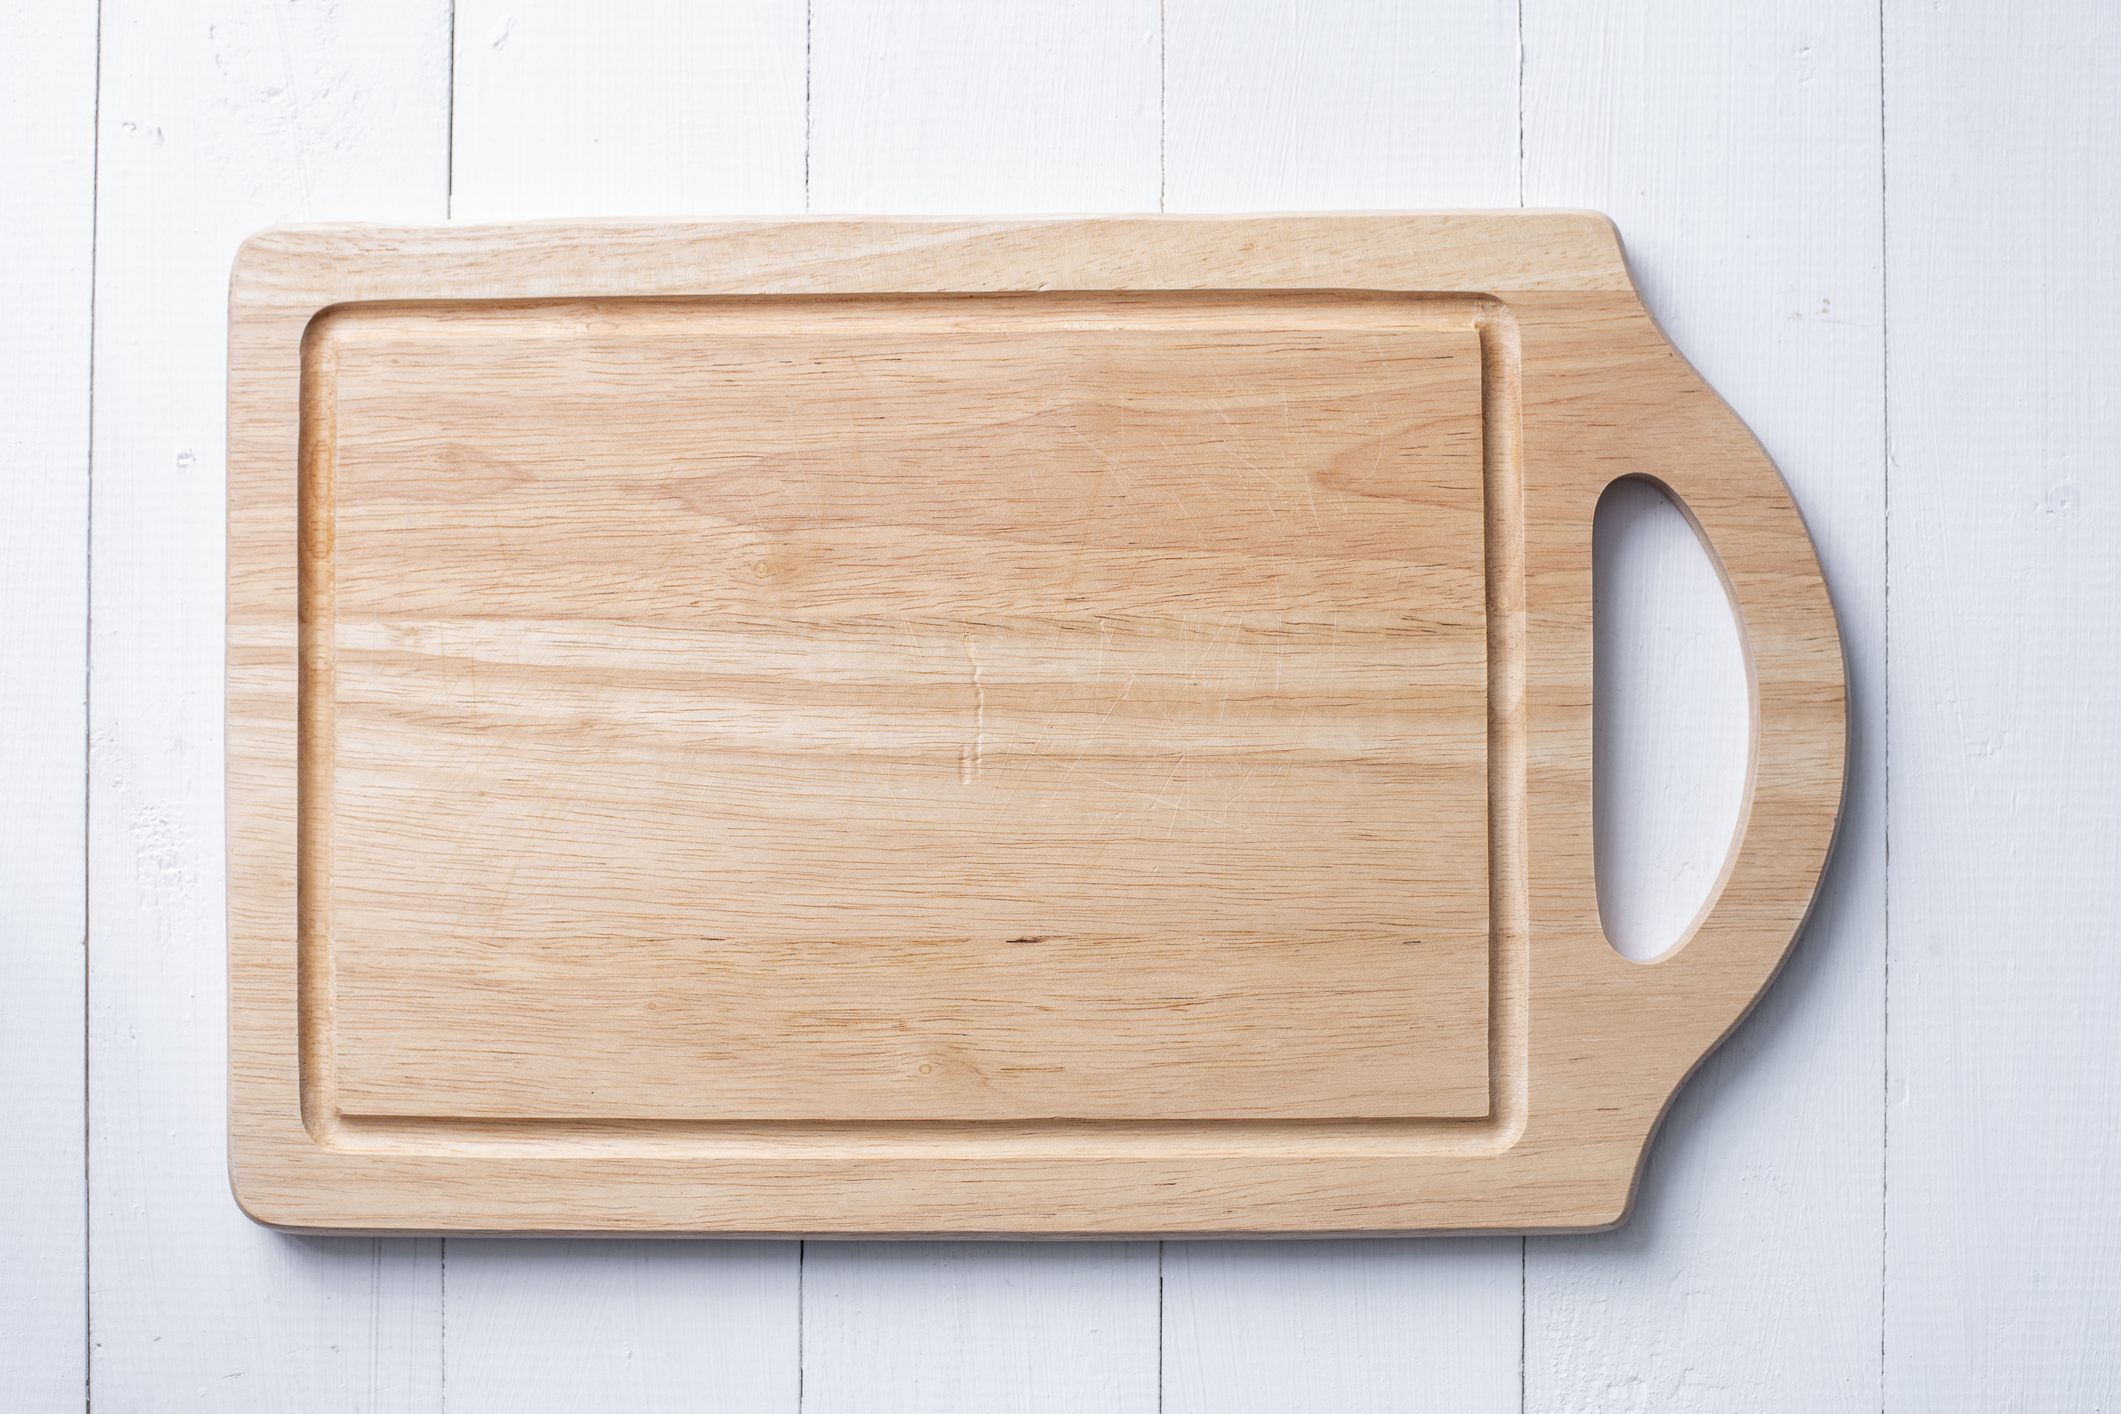 How to clean the wooden chopping board